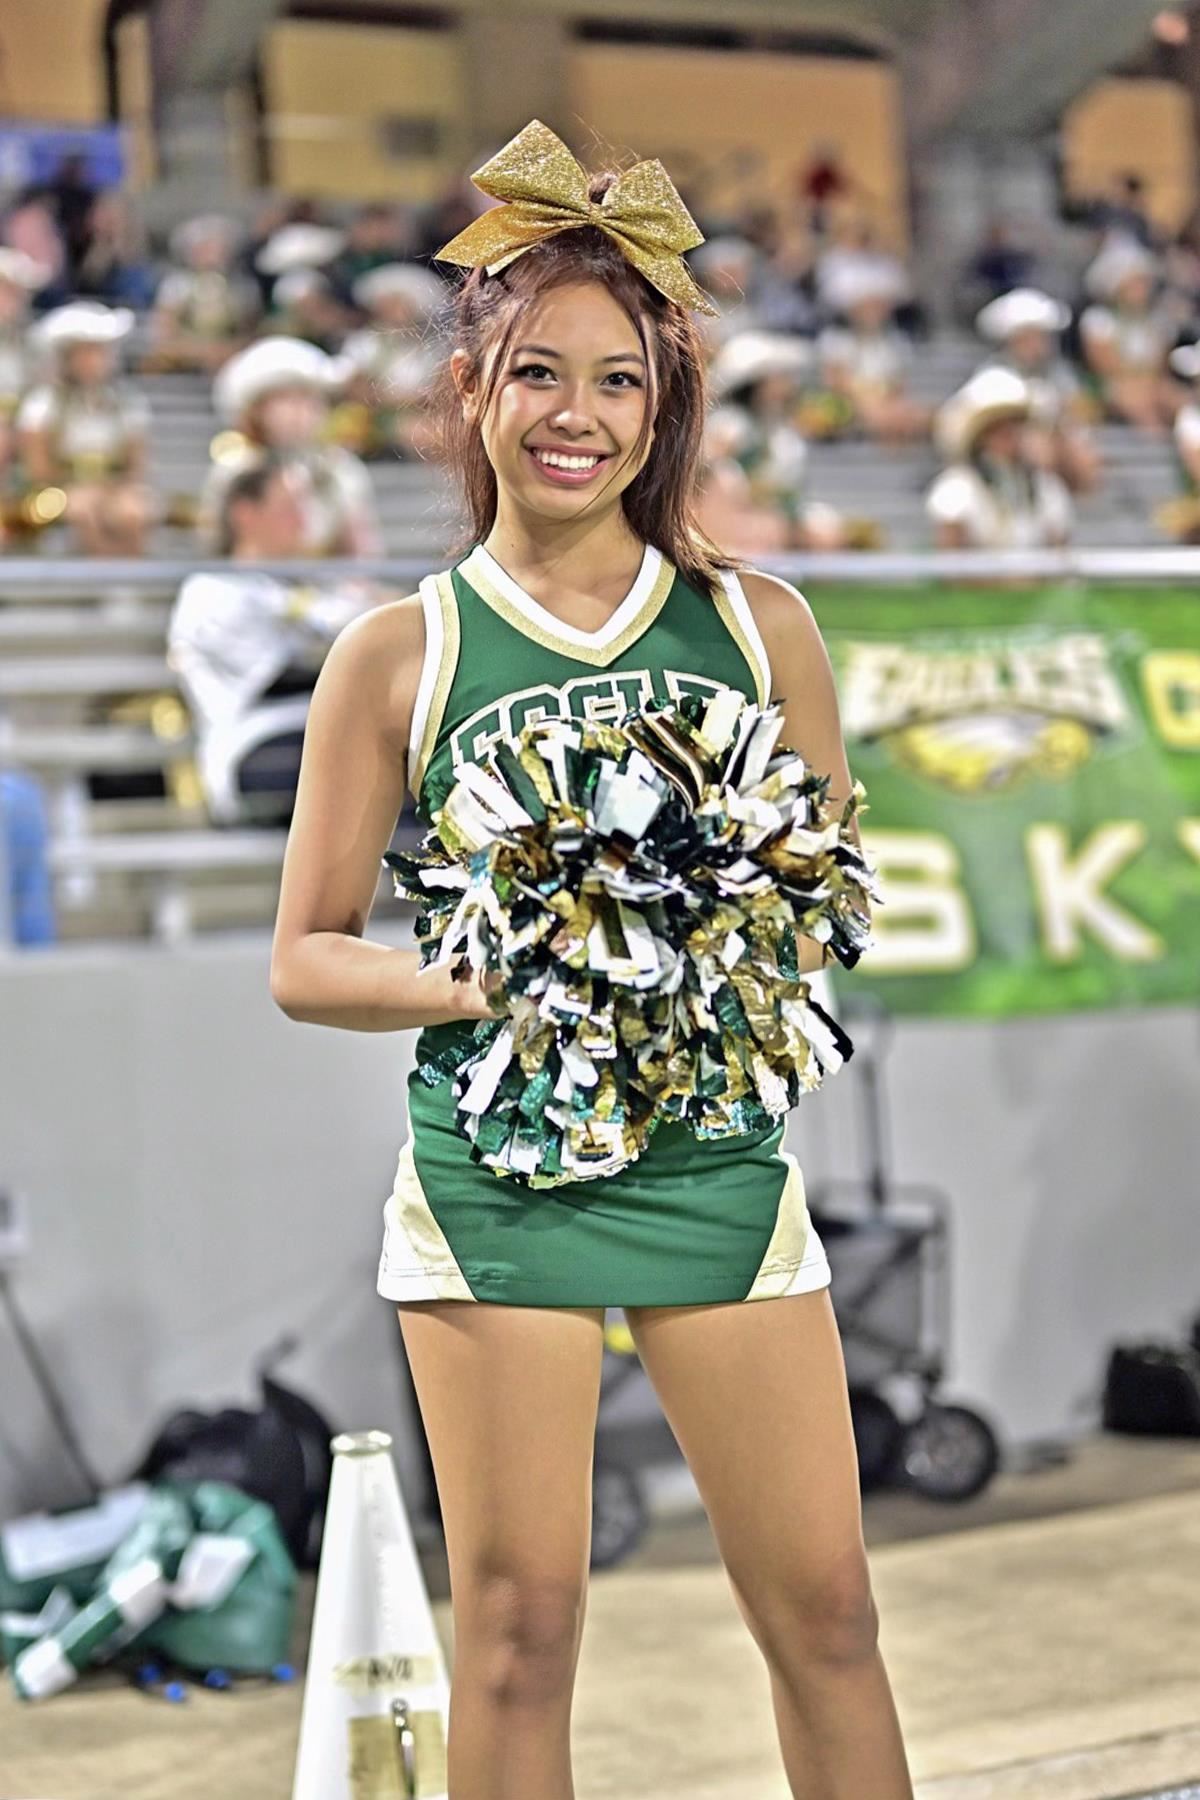 Cypress Falls High School senior Ava Lam is a three-time All-American cheerleader in her second year serving as captain.